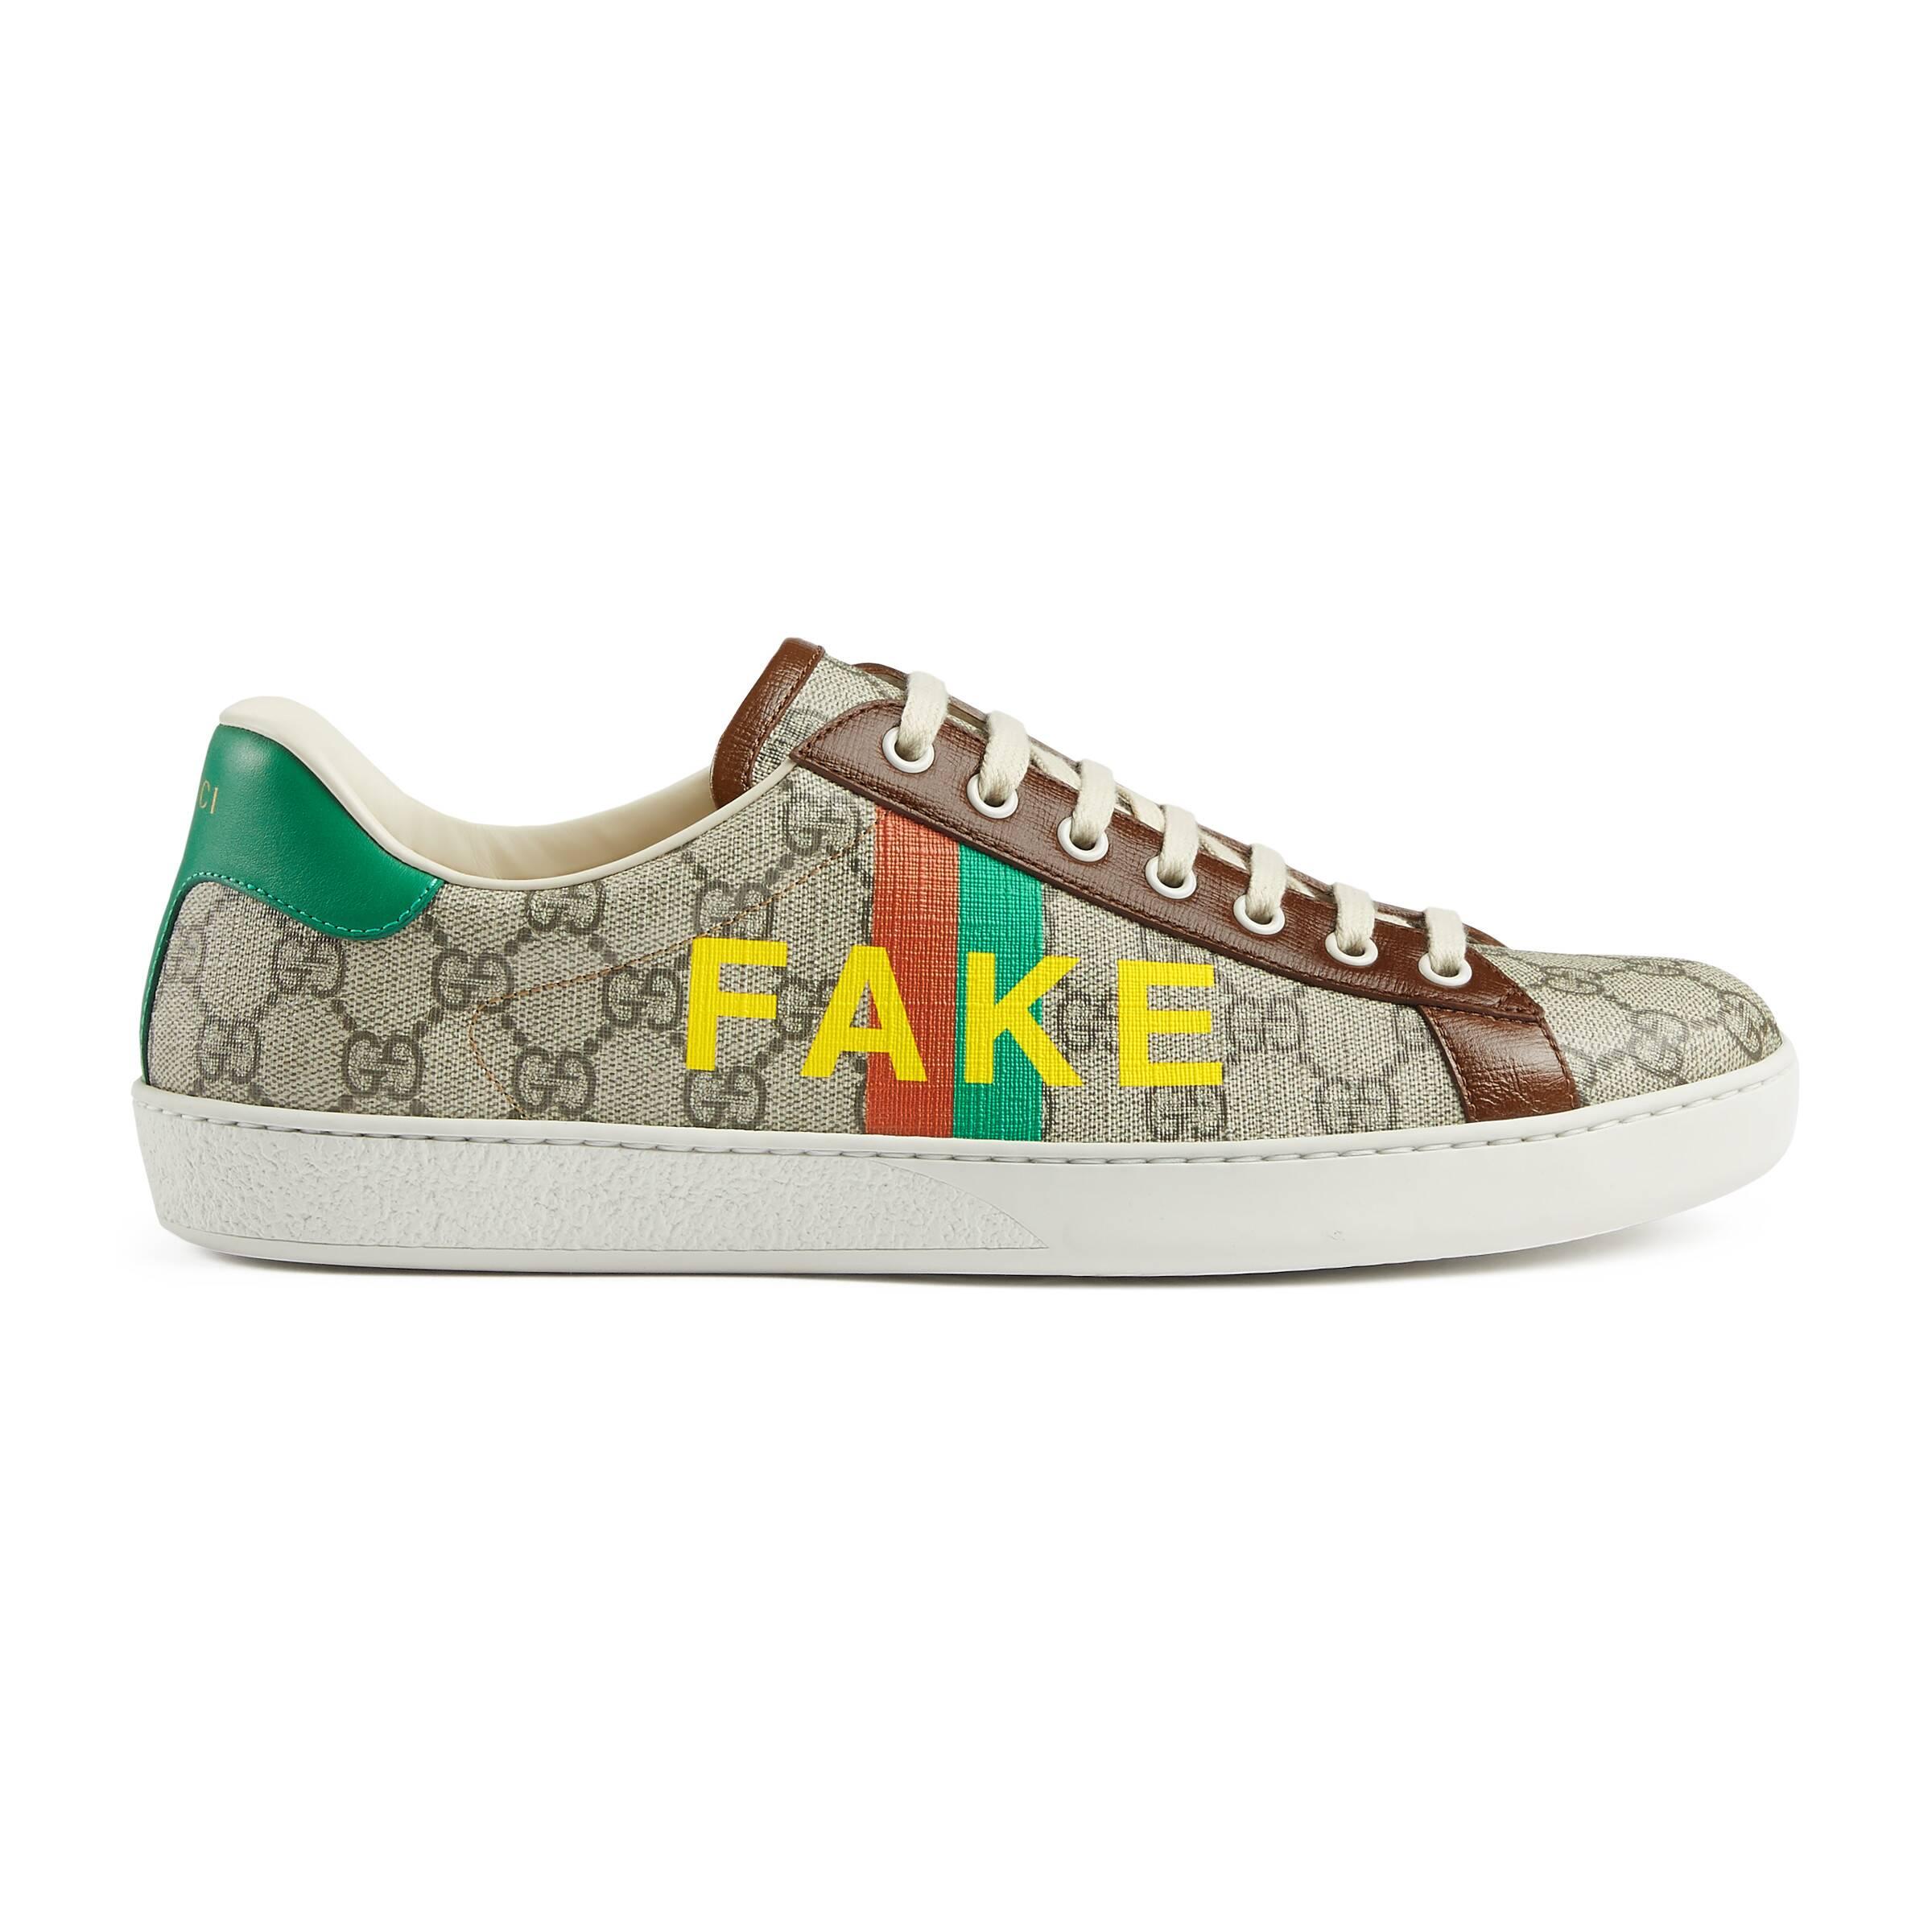 Gucci Canvas 'fake/not' Print Sneaker in Beige (Natural) - Lyst